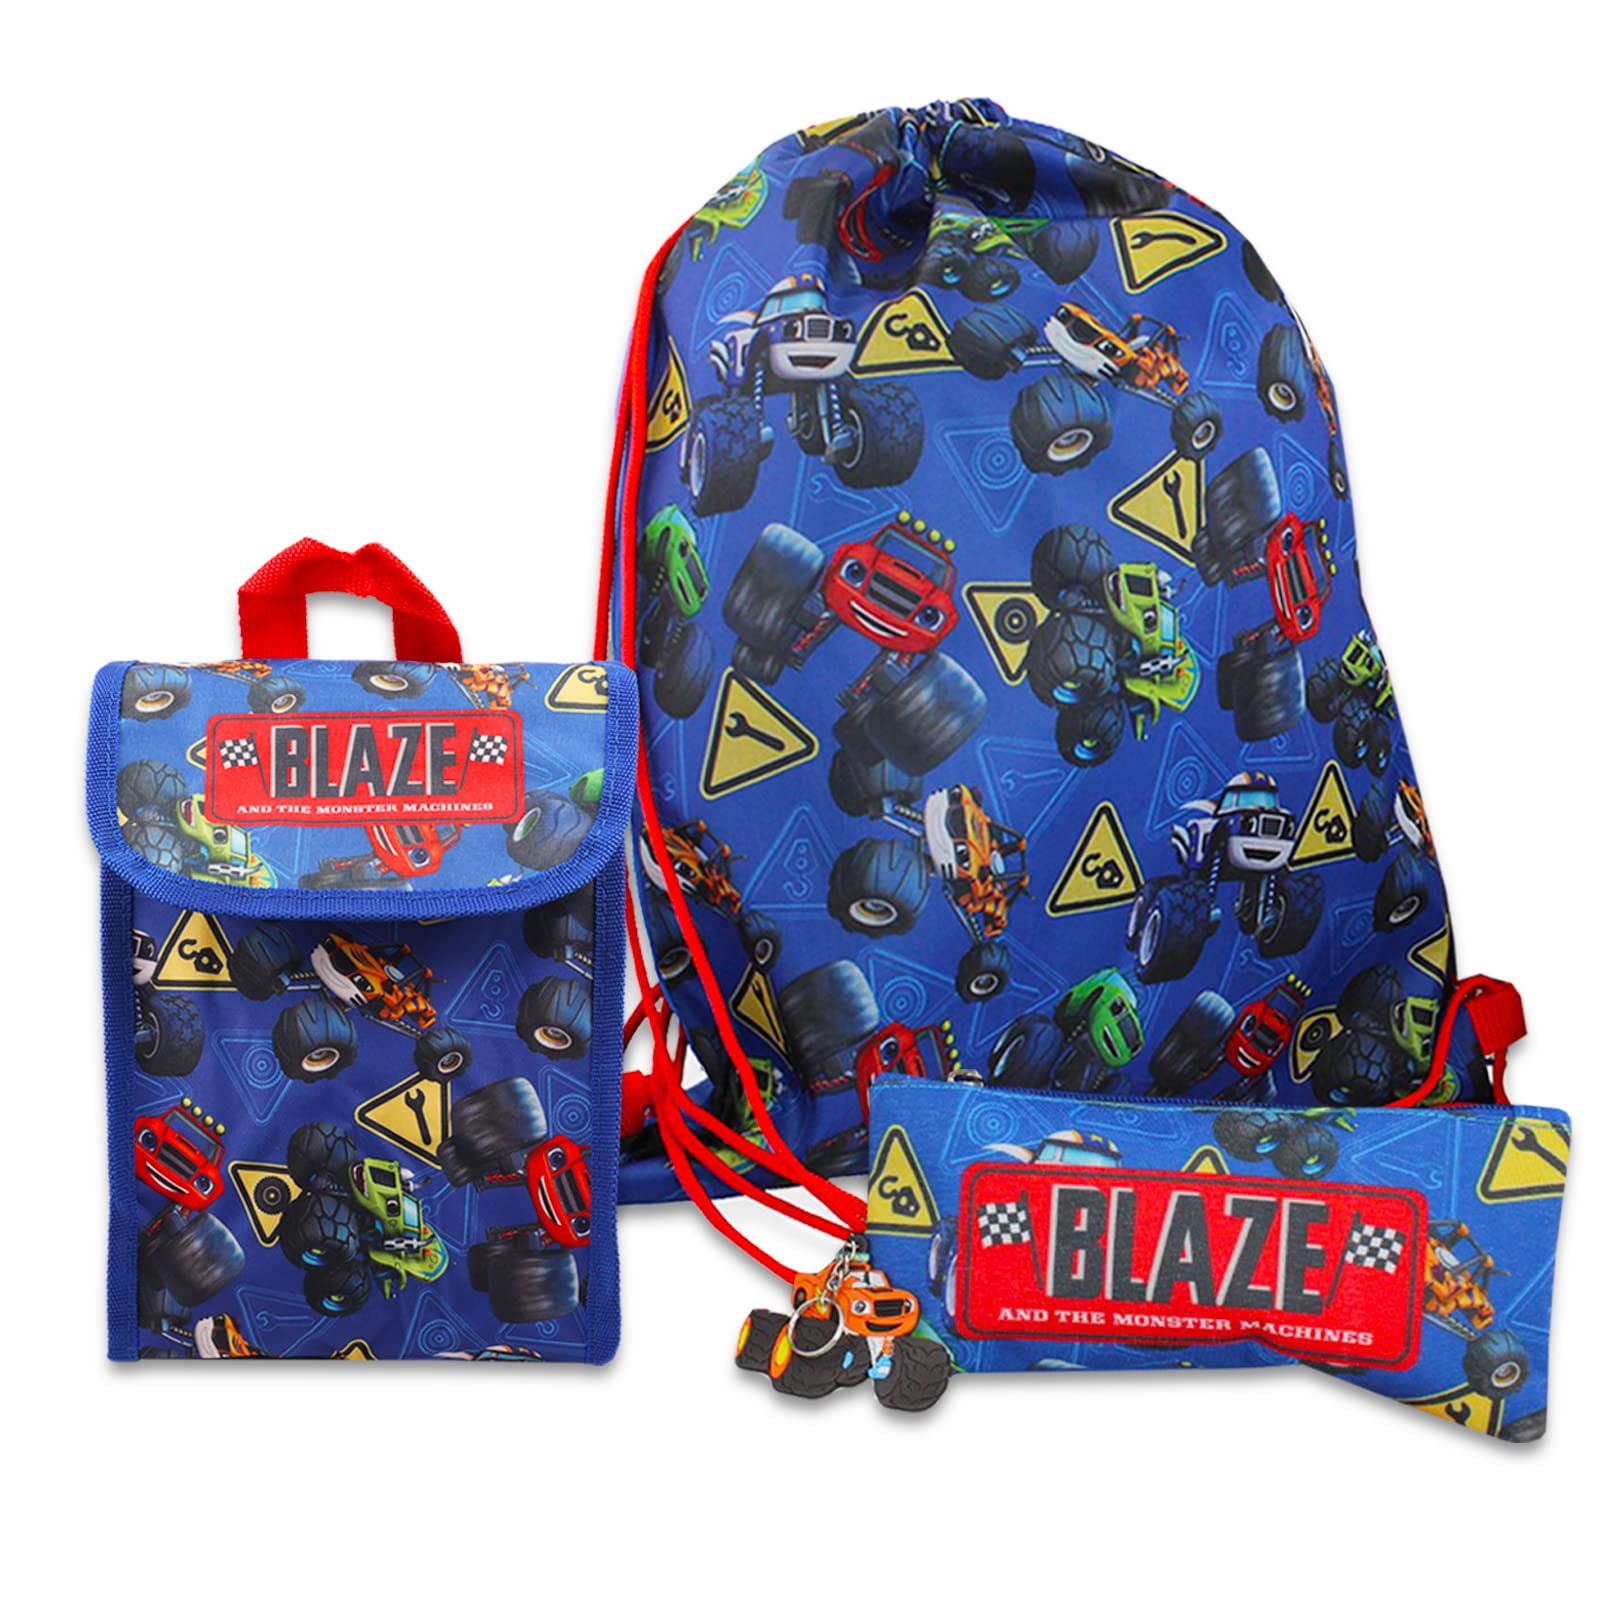 Blaze and the Monster Machines Backpack Set - Bundle with Blaze Backpack, Lunch Box, Drawstring Bag, Pencil Case, Stickers, More | Blaze School Supplies